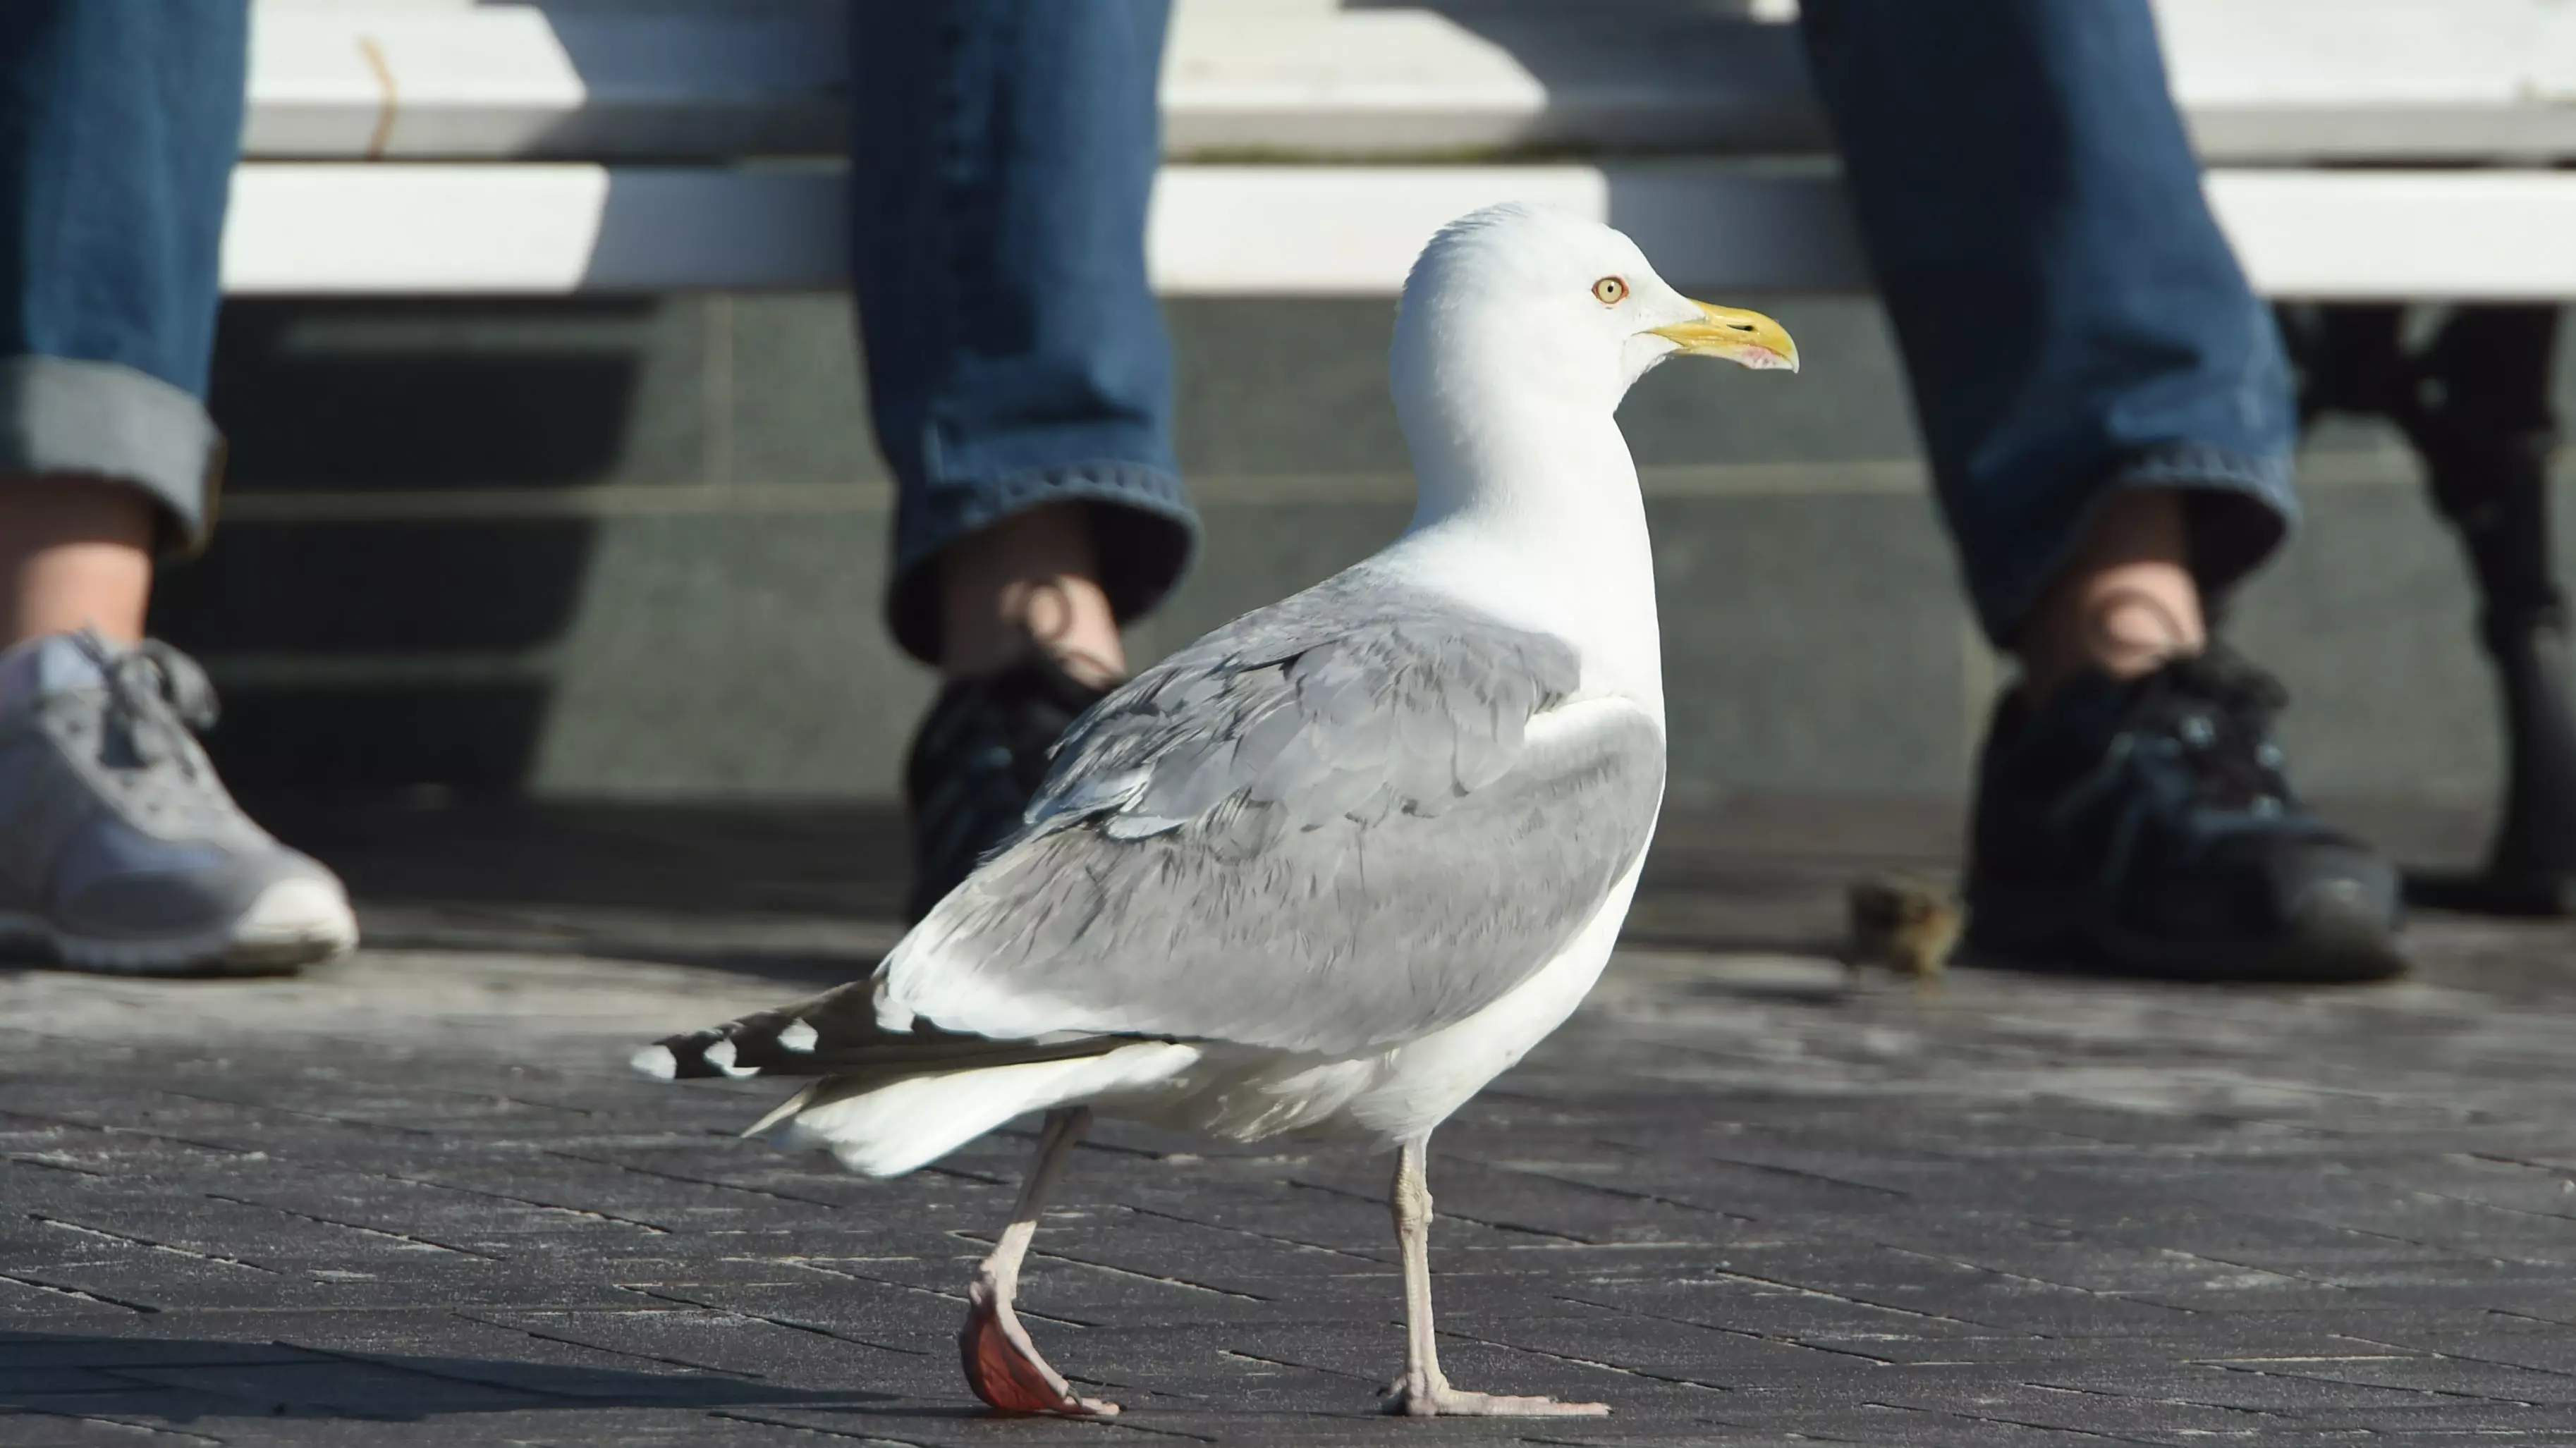 Seagulls Are Getting Drunk And Making Fools Of Themselves